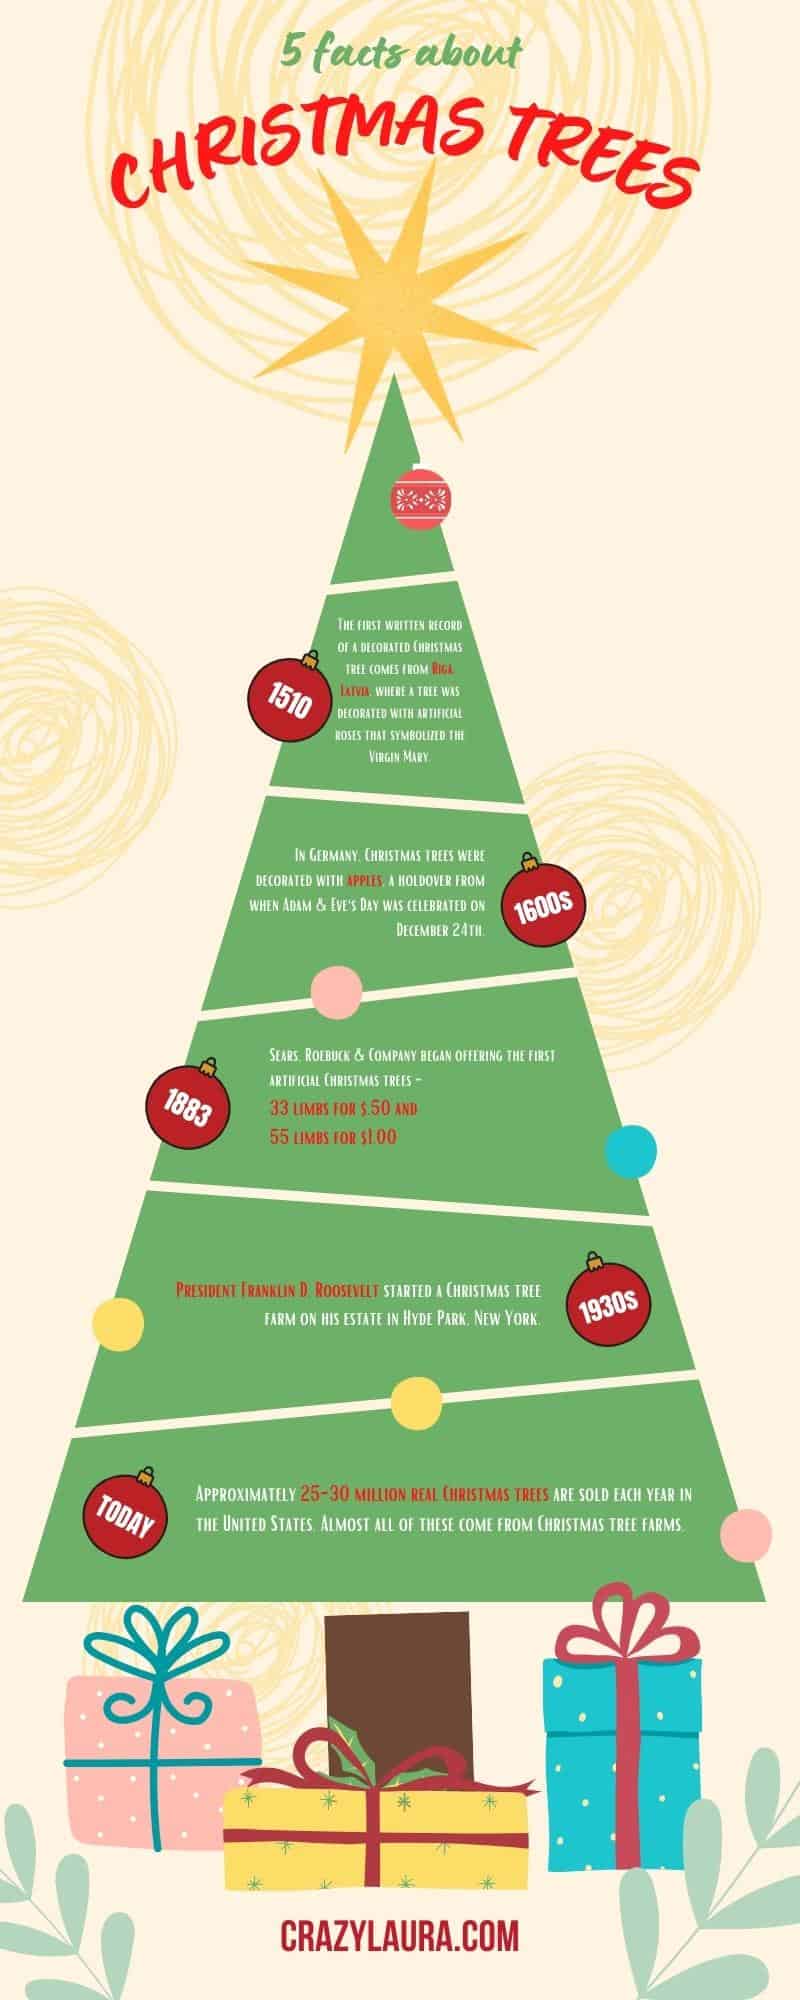 Infographic on 5 Facts About Christmas Trees